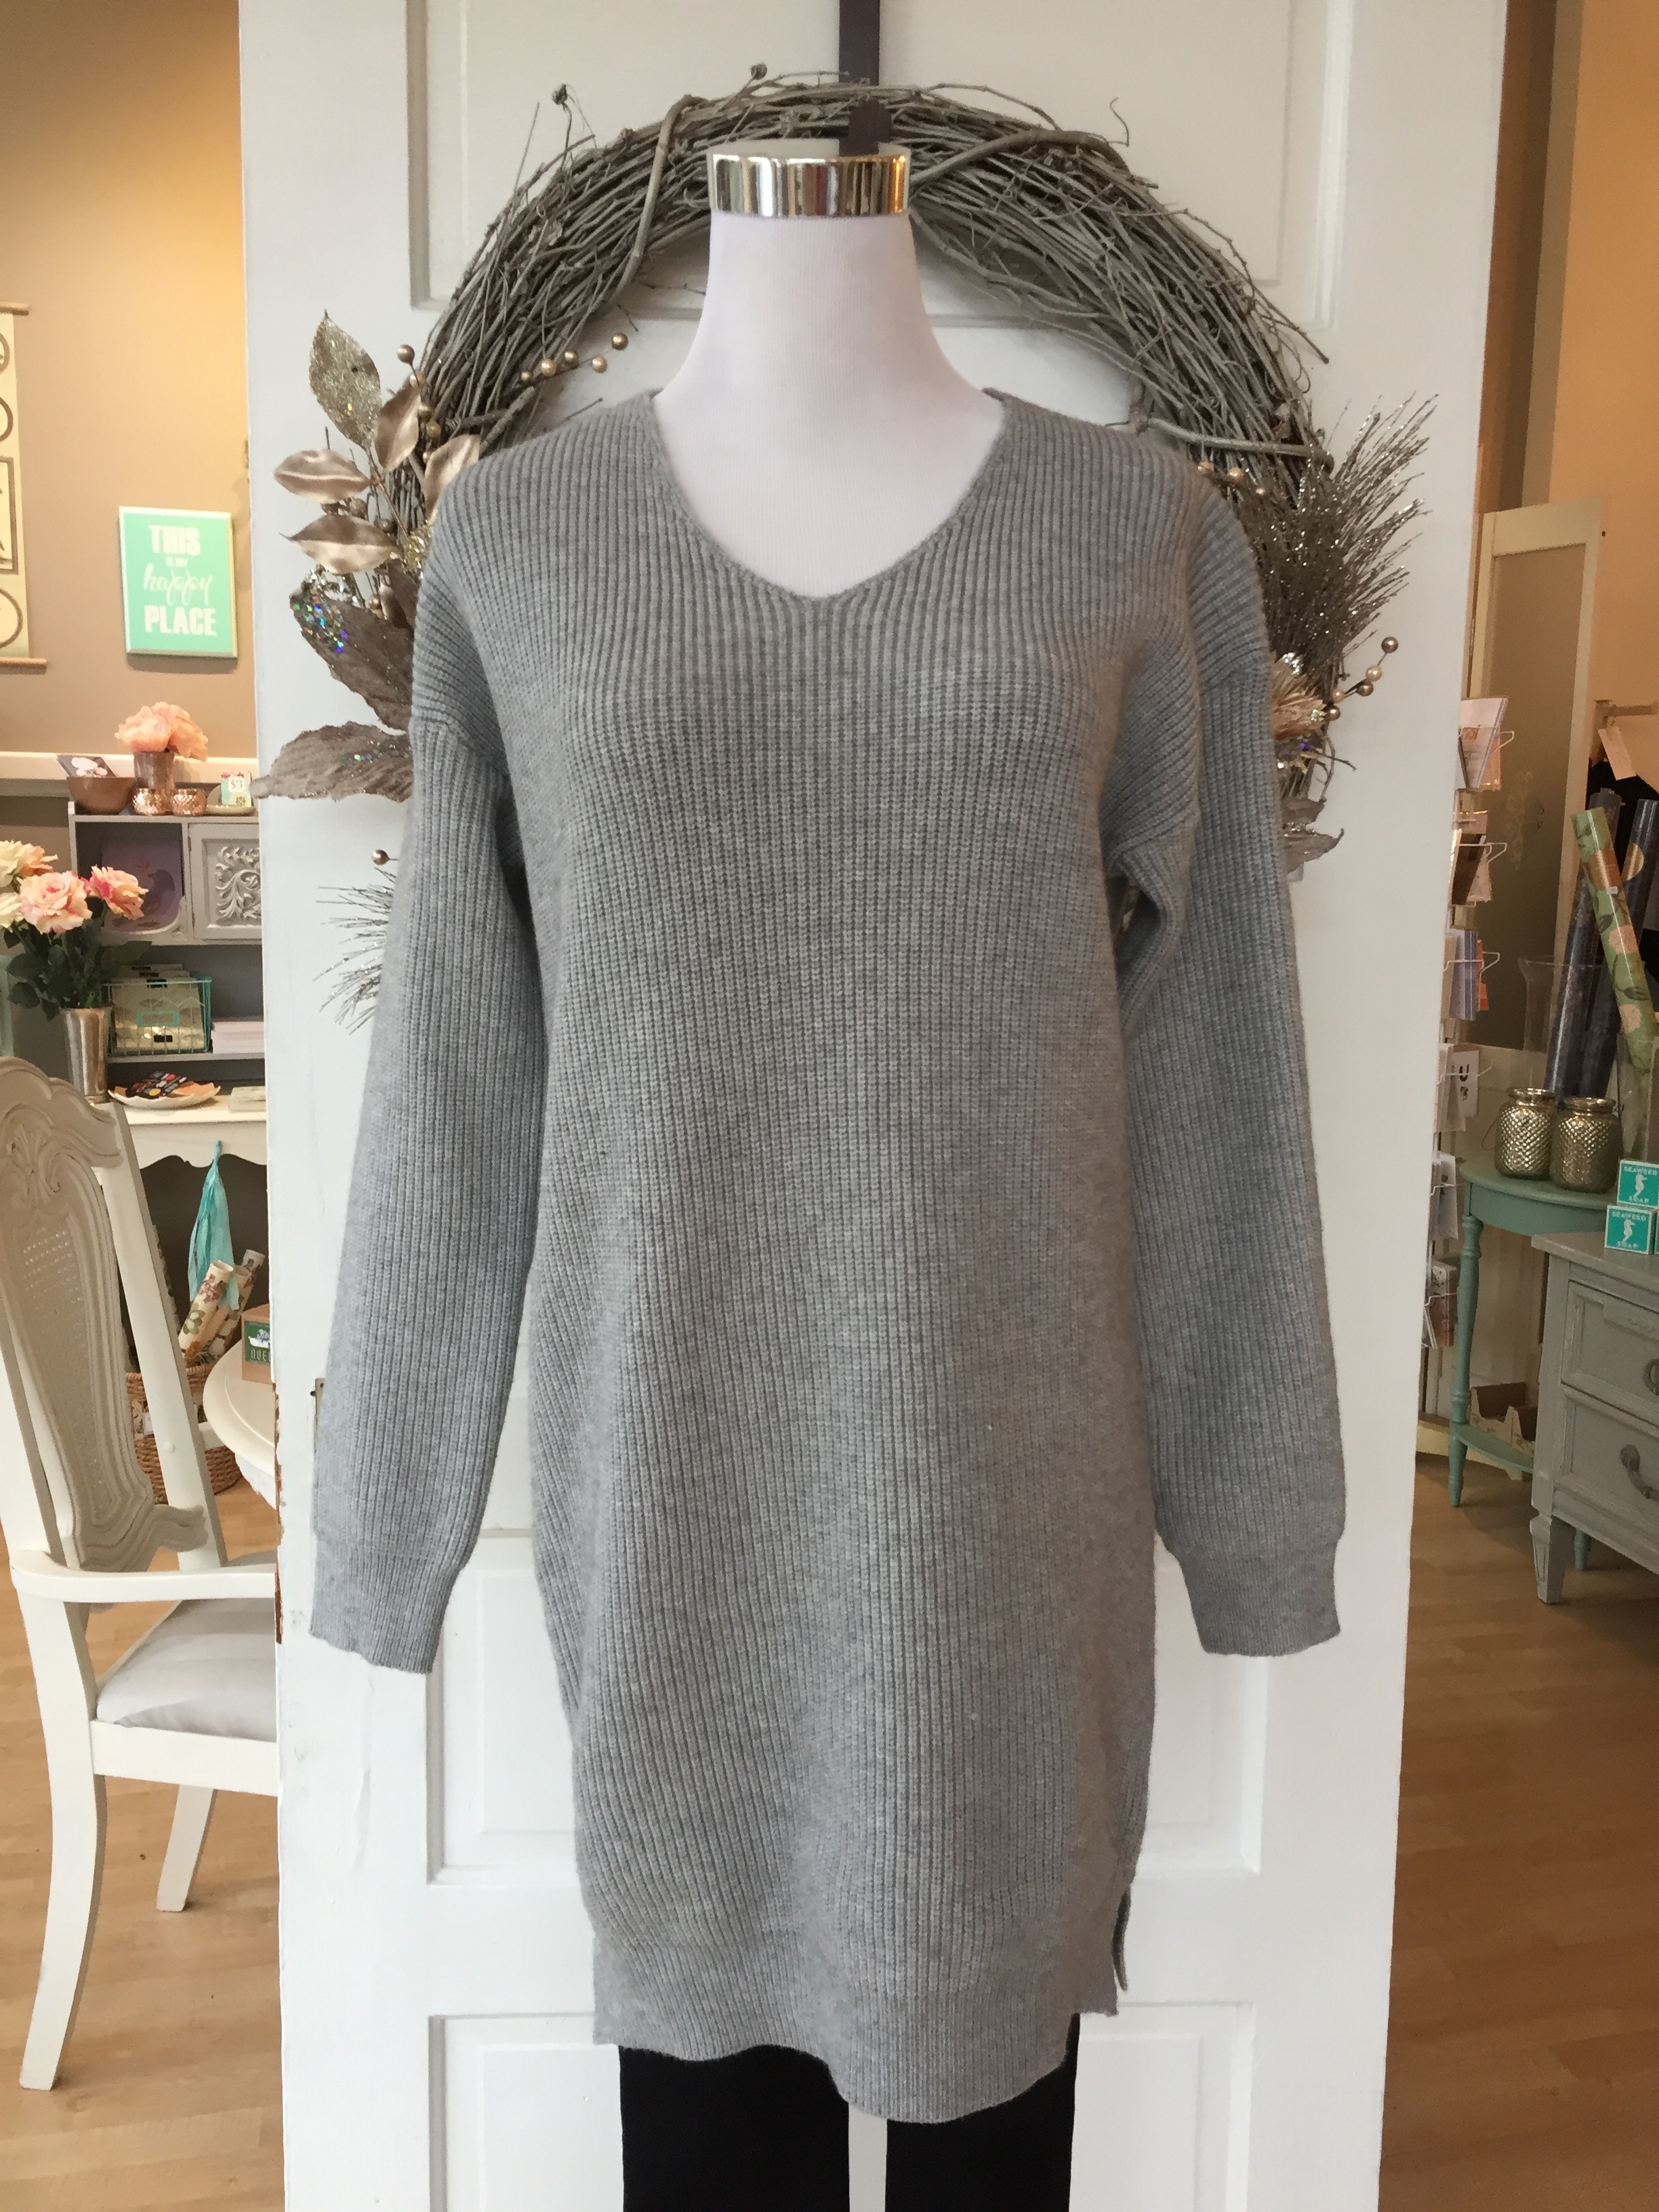 Dreamers Chunky Knit Sweater $42